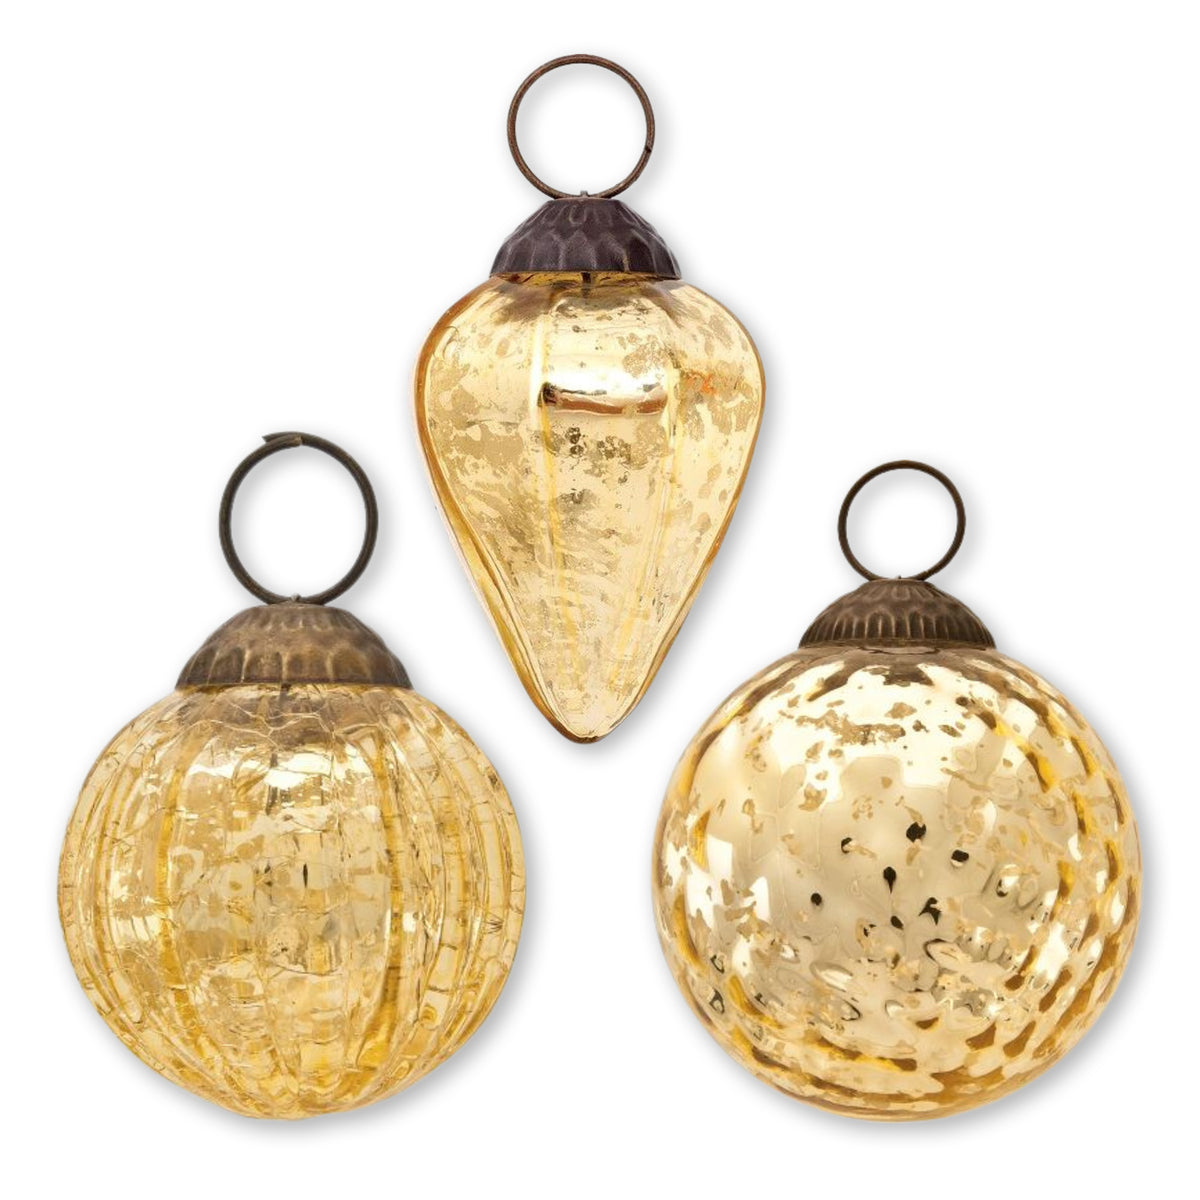 BLOWOUT 3 Pack | Gold Vintage Glam Assorted Ornaments Set - Great Gift Idea, Vintage-Style Decorations for Christmas, Special Occasions, Home Decor and Parties